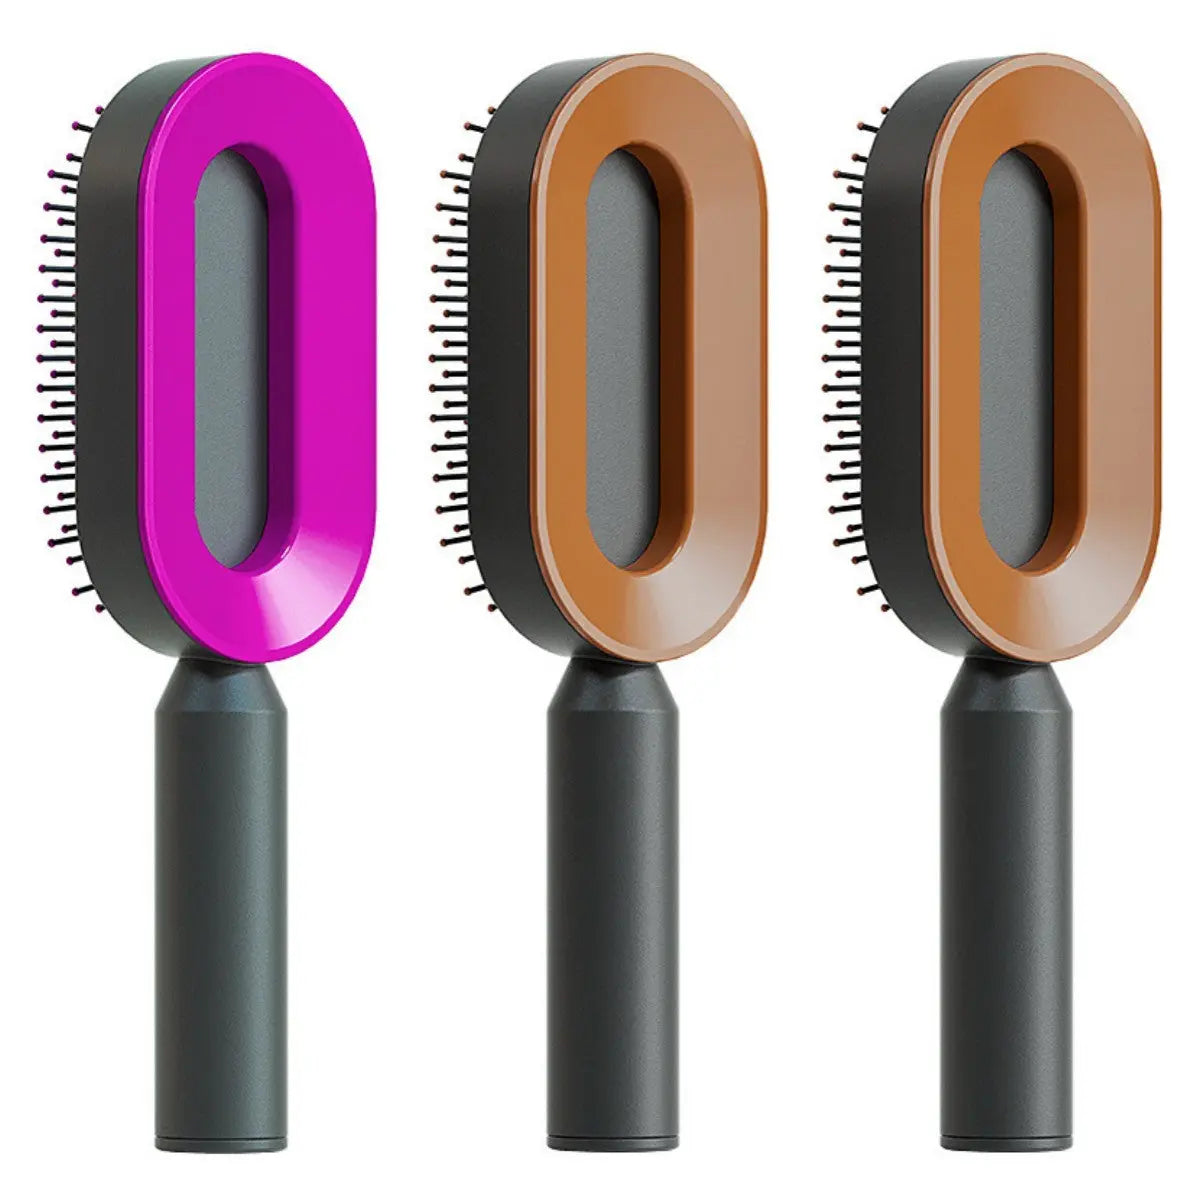 Self Cleaning Hair Brush For Women One-key Cleaning Hair Loss Airbag Massage Scalp Comb Anti-Static Hairbrush - Trending's Arena Beauty Self Cleaning Hair Brush For Women One-key Cleaning Hair Loss Airbag Massage Scalp Comb Anti-Static Hairbrush FACE Set-U